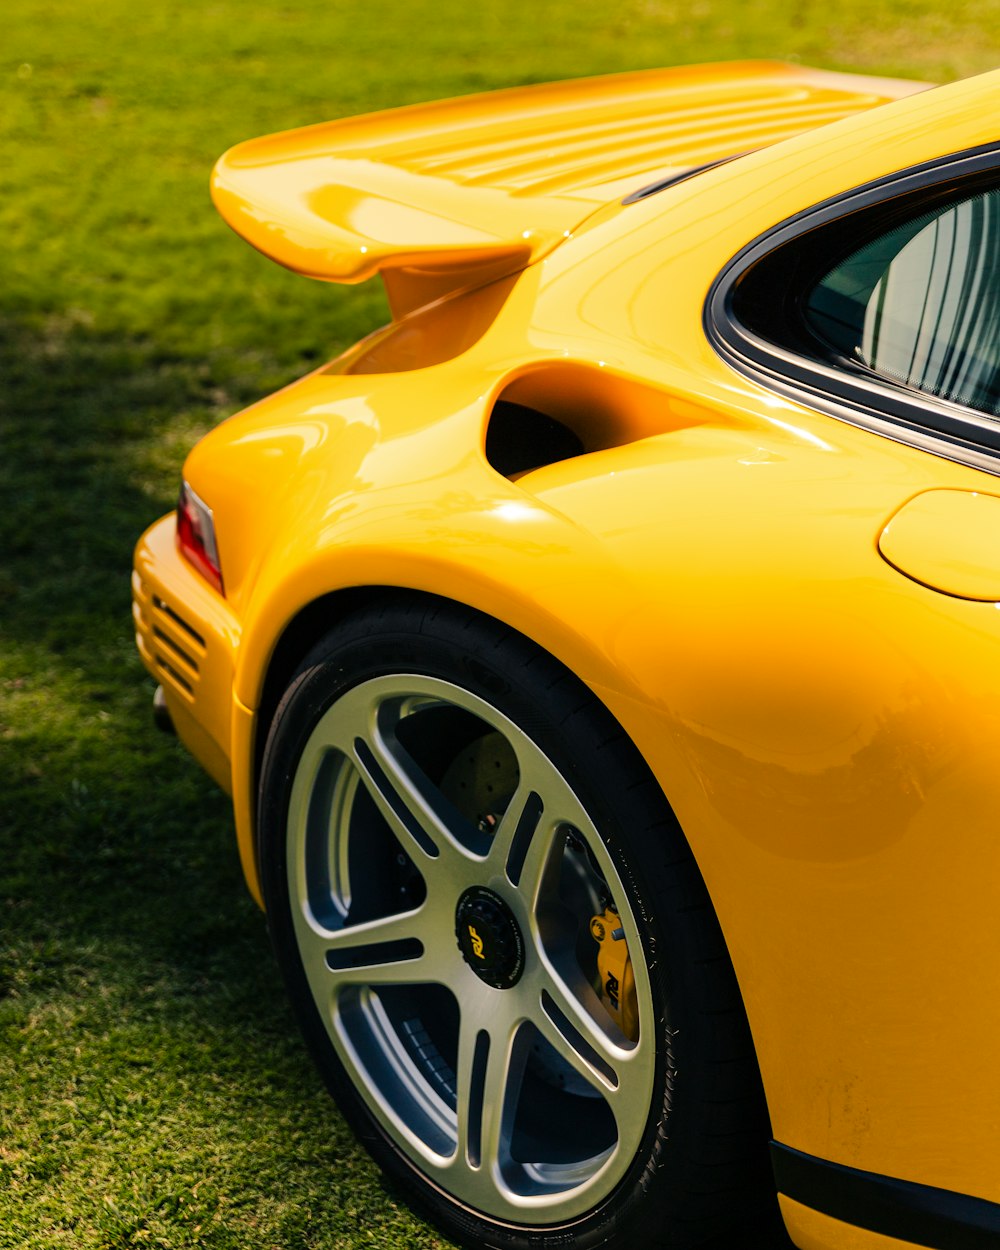 a yellow sports car parked in a grassy field